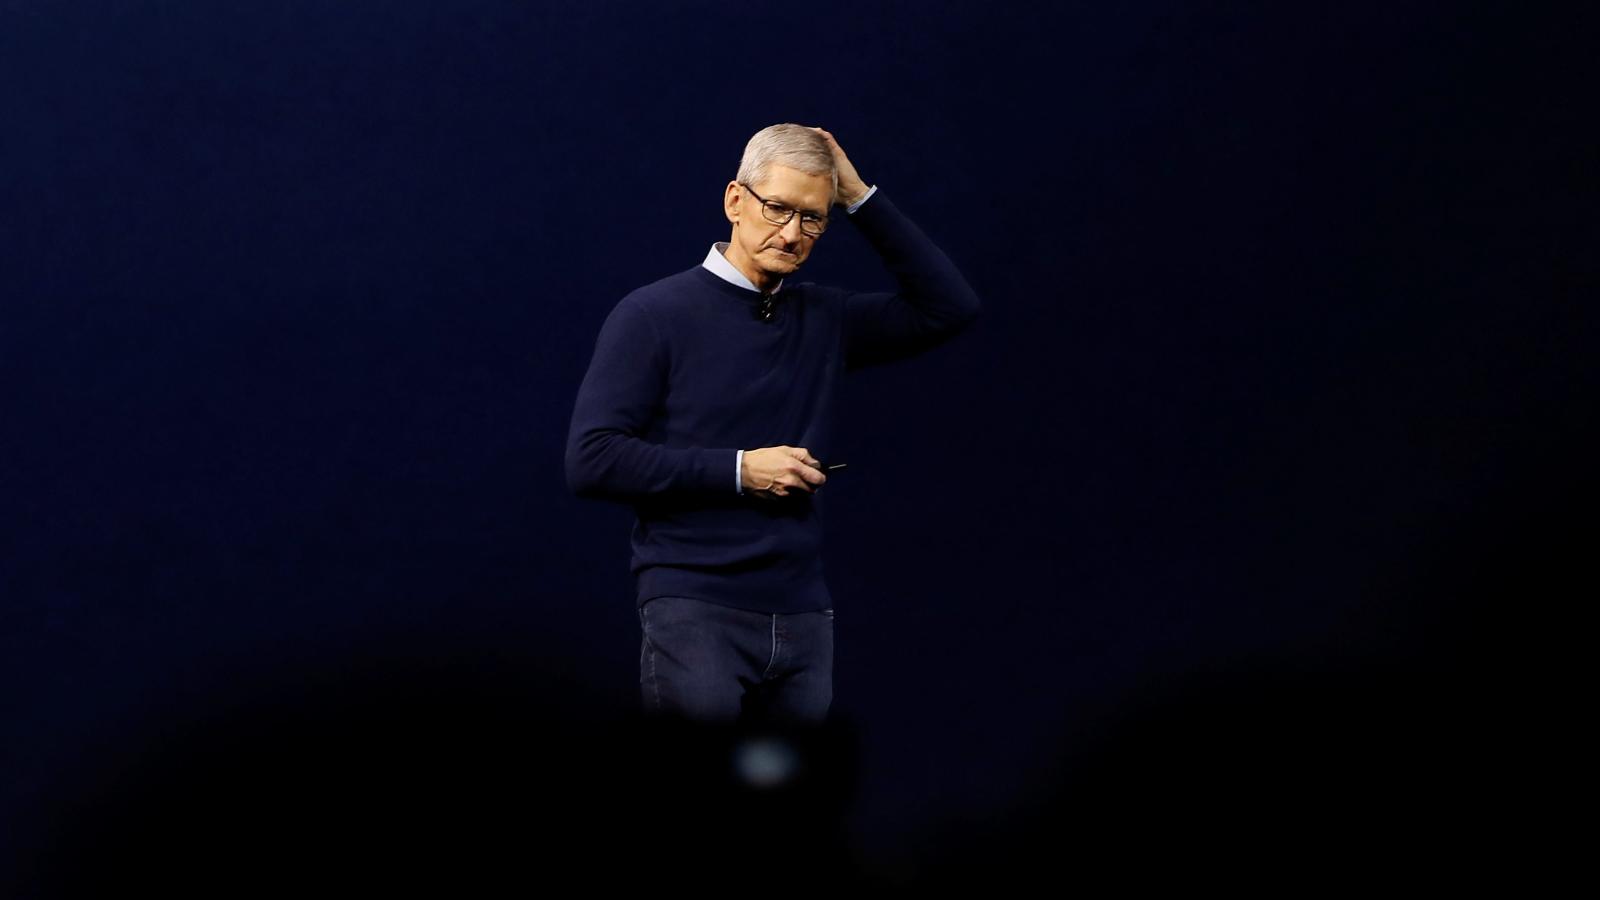 Apple CEO Tim Cook on learning to code: He doesn't seem to